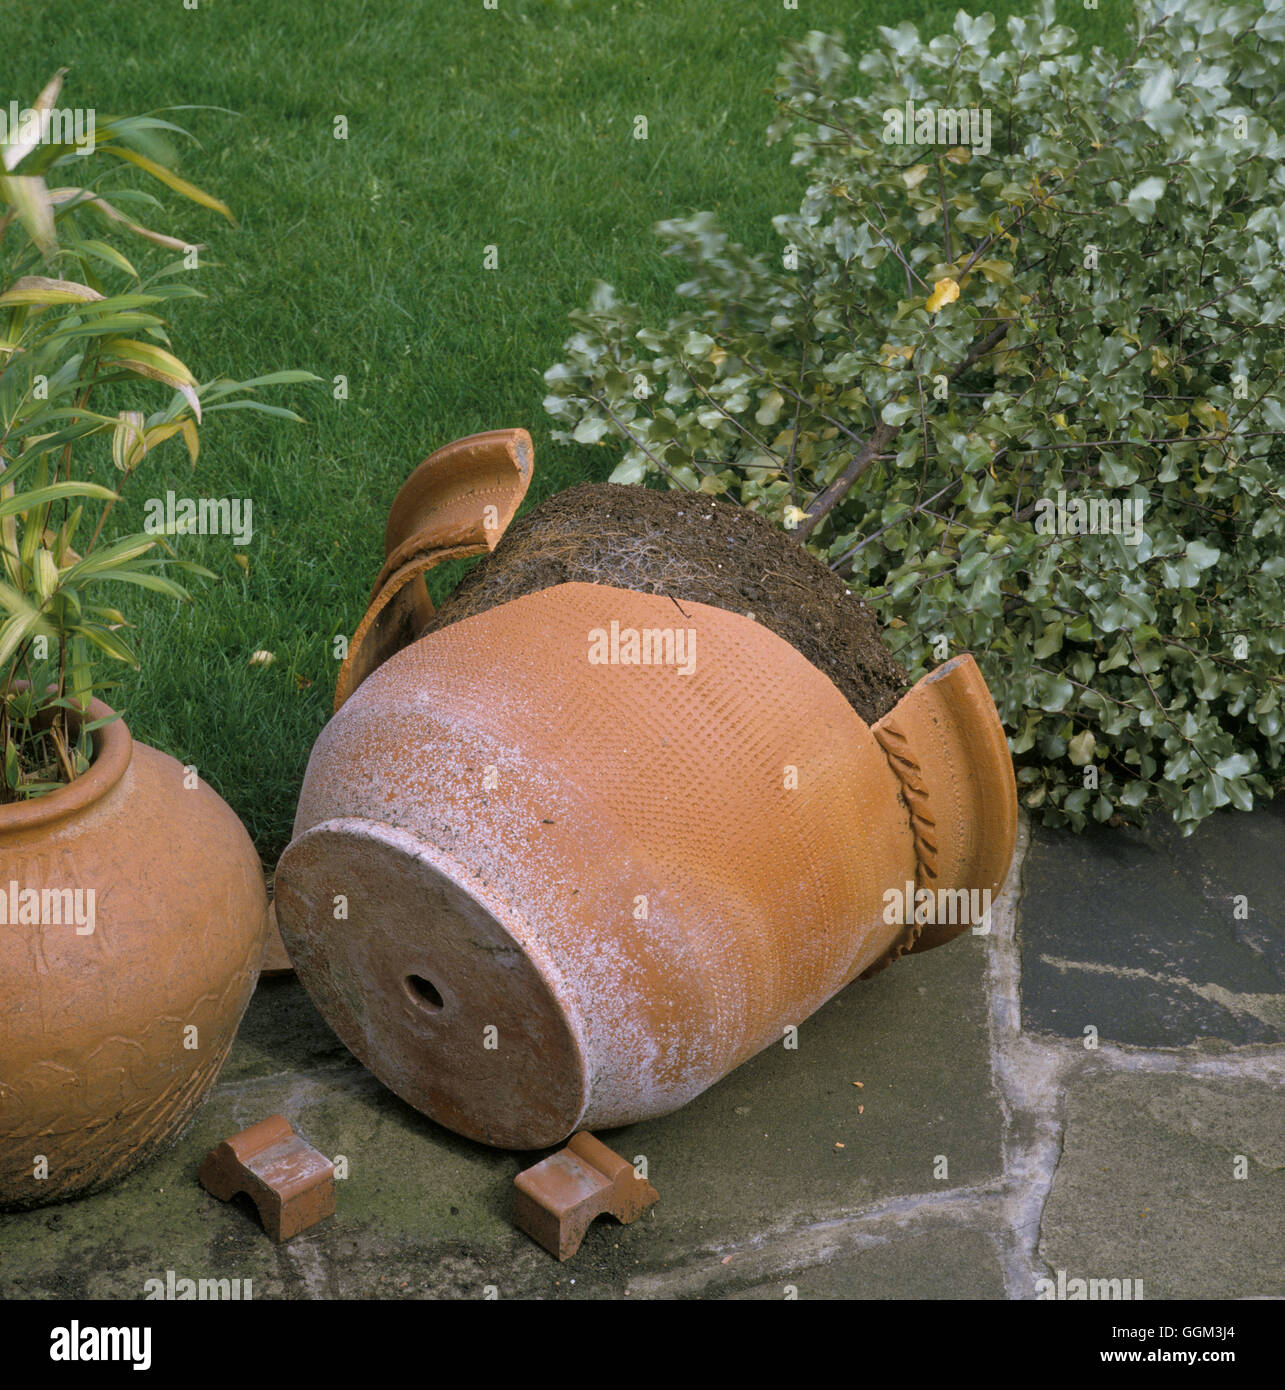 Wind Damage  Container grown shrud blown over in wind resulting in smashed pot.  Date: 20.06.08  PES045472  COMPULSORY Stock Photo